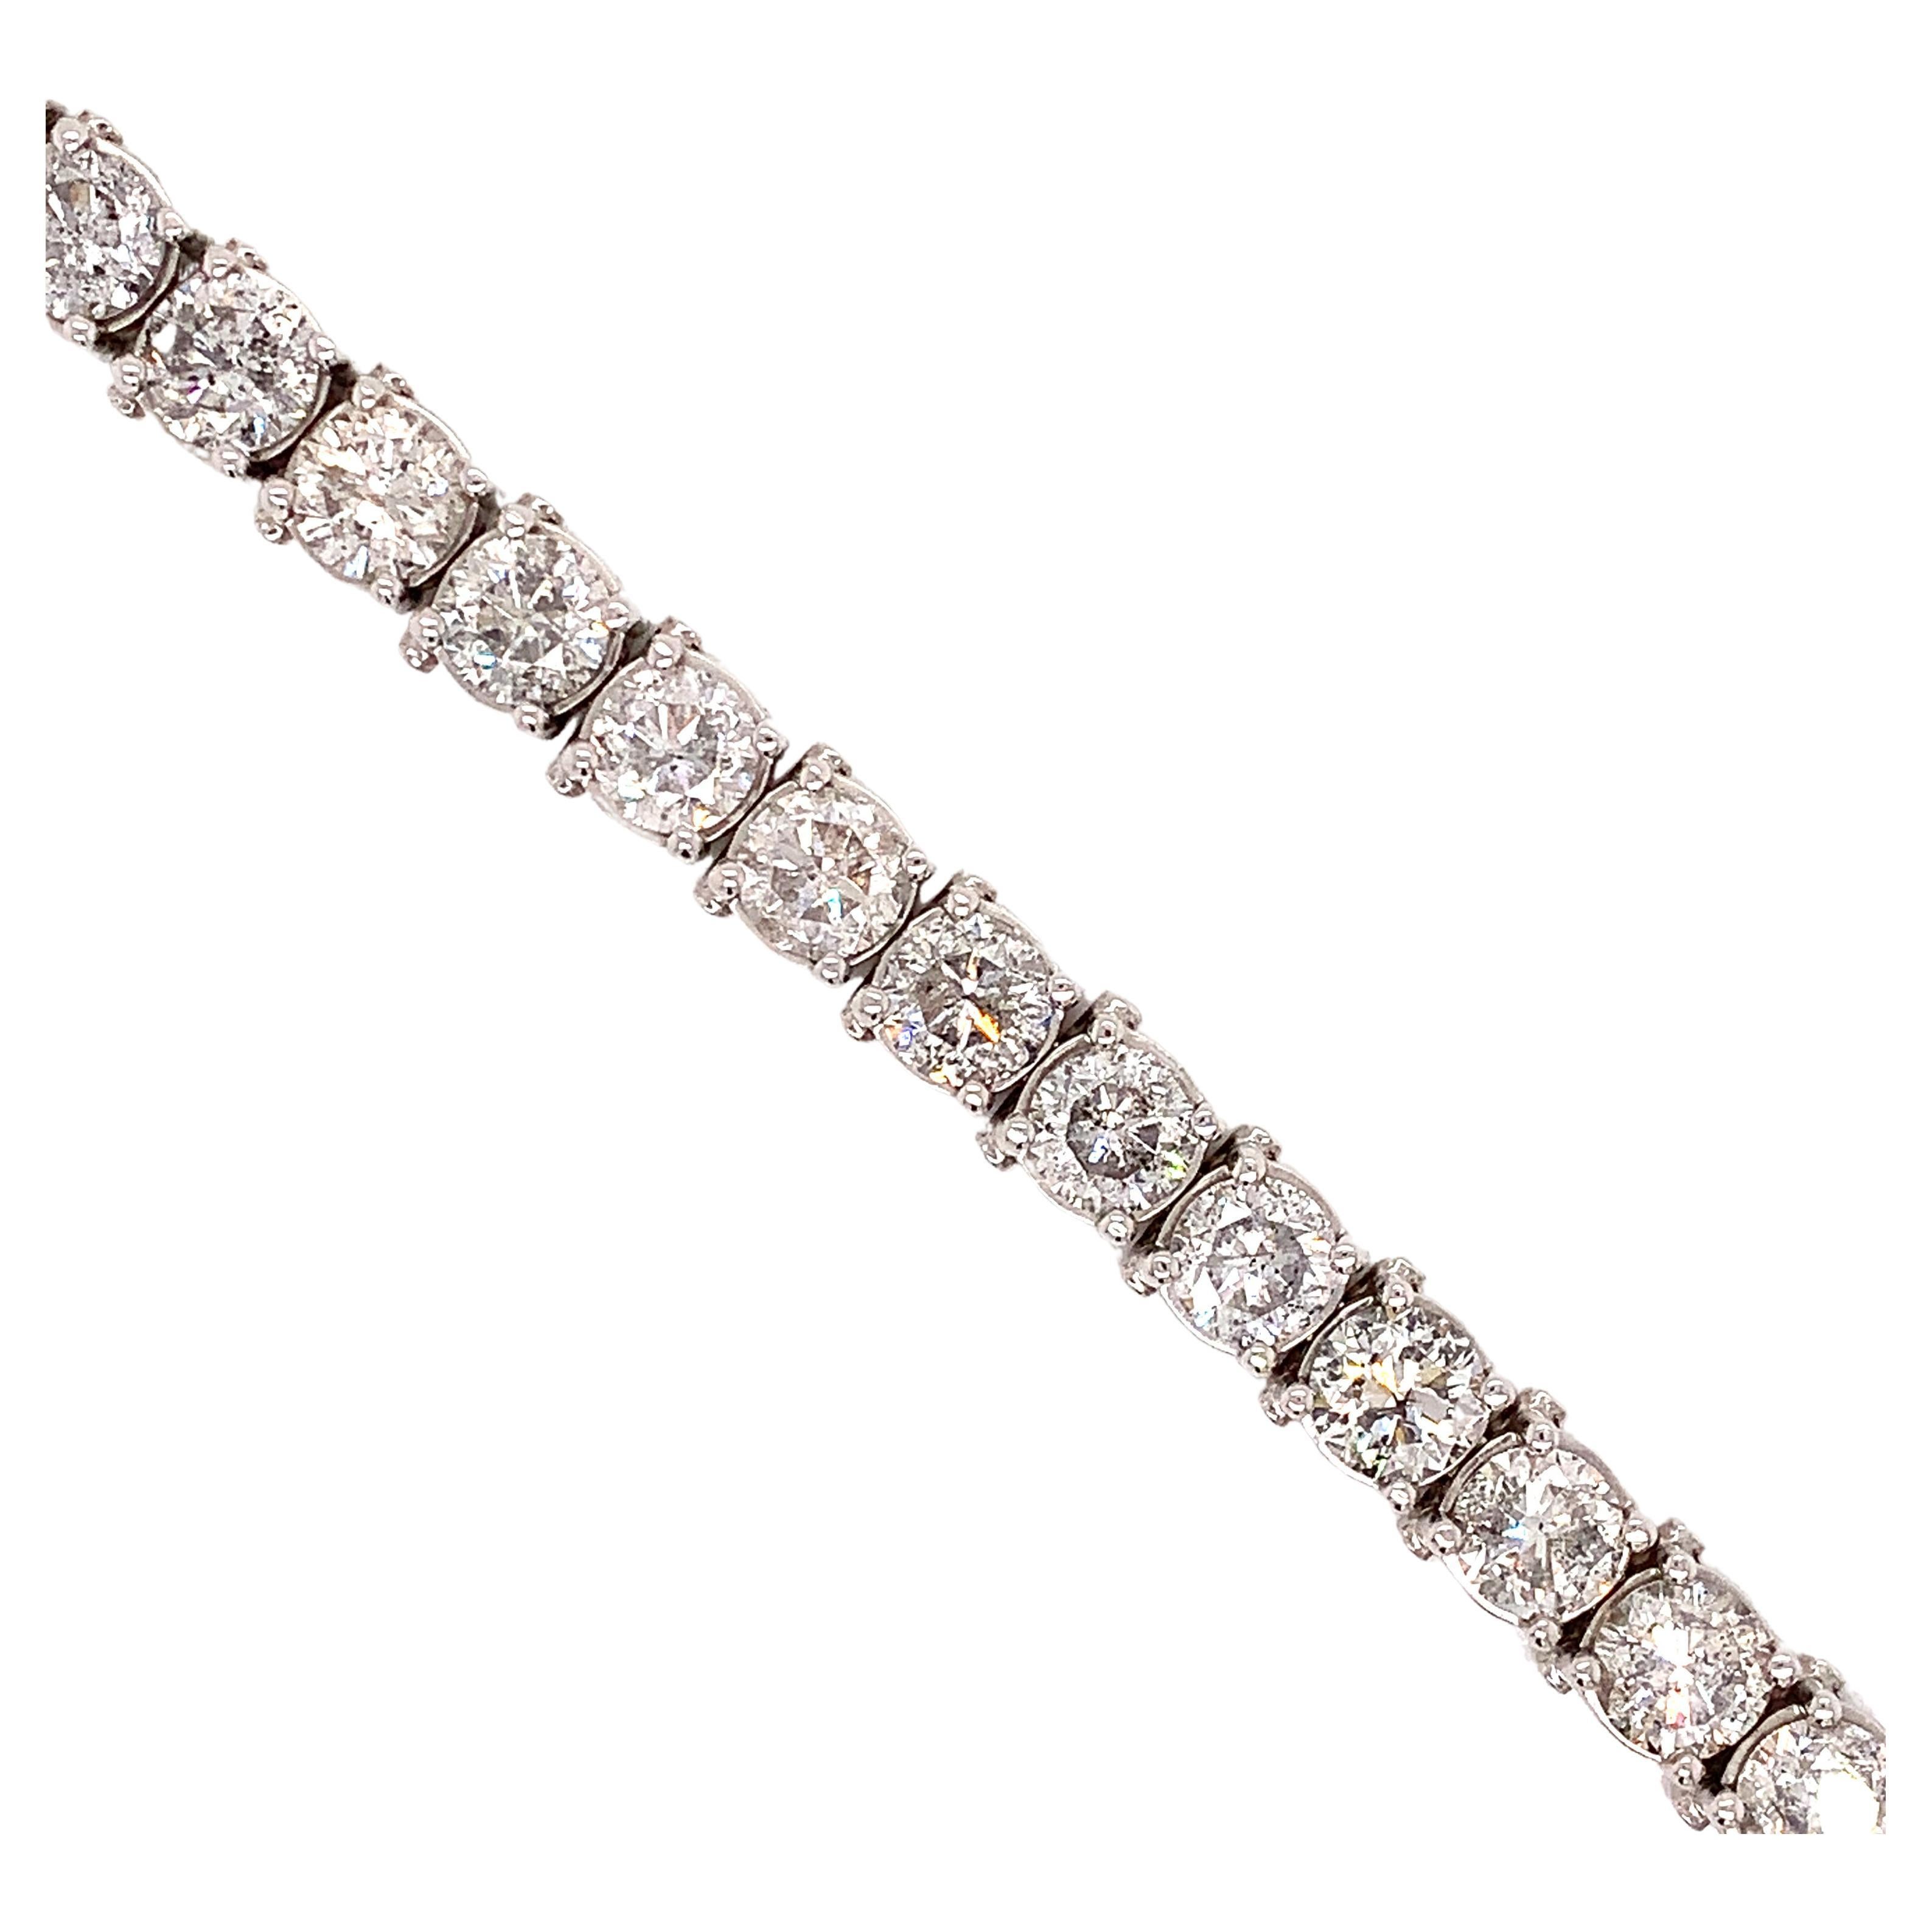 With EACH diamond approximately 1.14 carat, this is a spectacular sparkling diamond tennis bracelet! Twenty six round diamonds make up 29.75 cttw.  The diamonds are I1-I2color and I-J in color.  They are set in a classic 14 kt white gold four prong